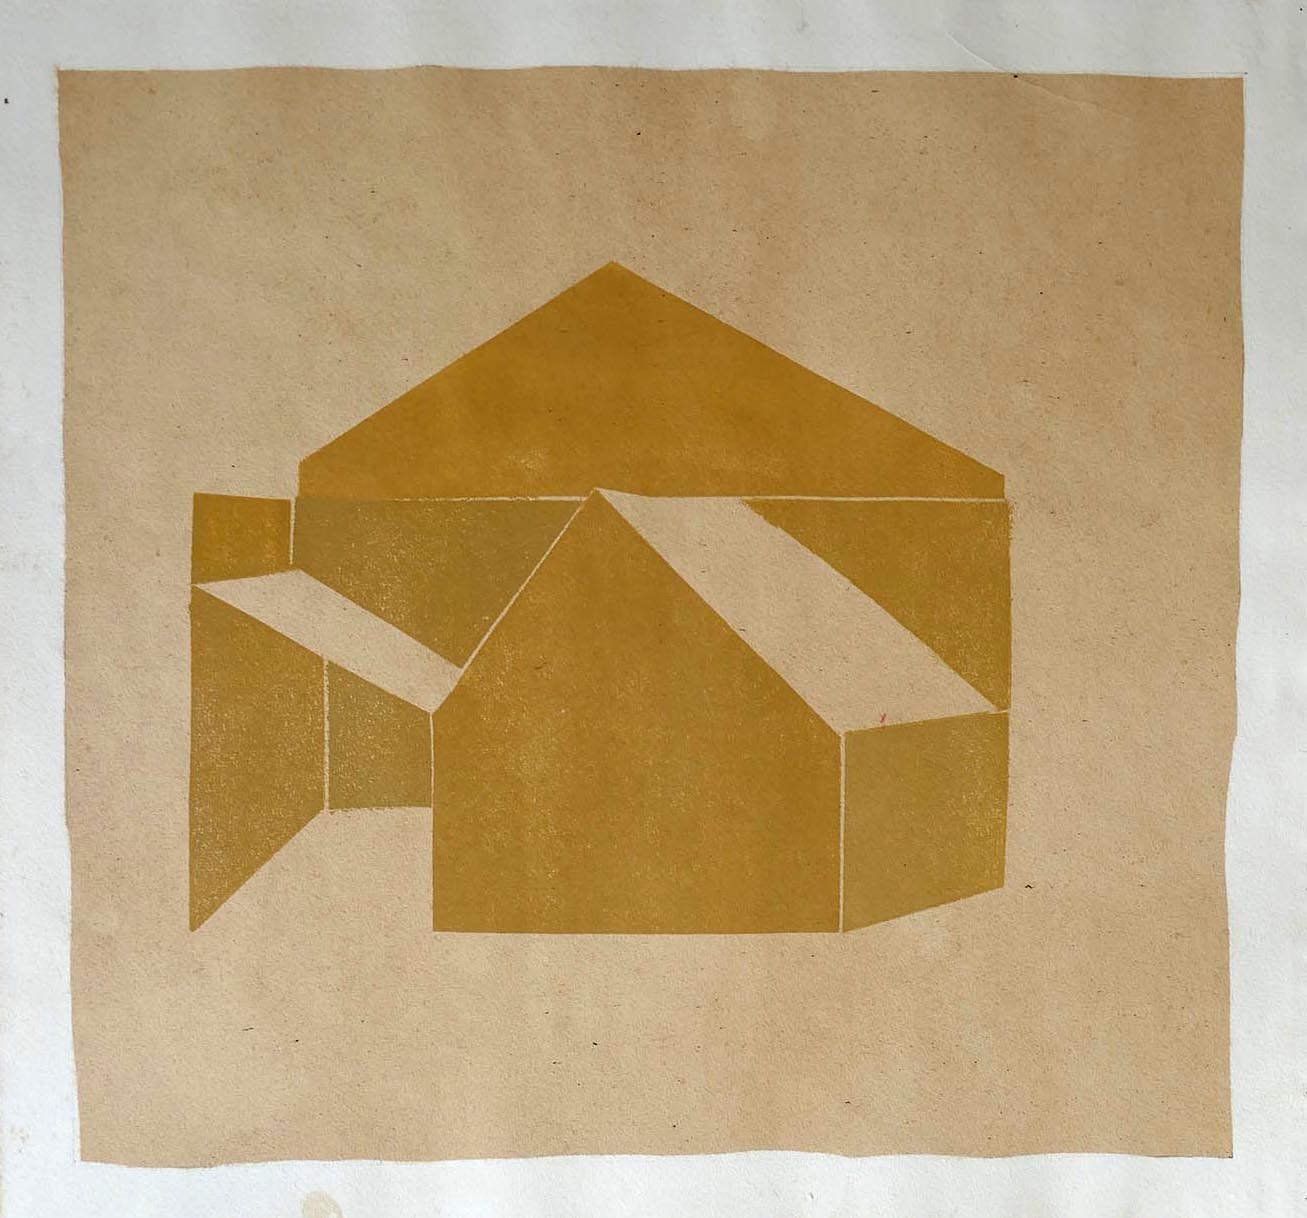 Architecture végétale 1, 2020, monotype on dyed paper (chesnuts leaves), image size 43,5 x 43,5 cm, paper size 45x45 cm, edition of 1jpg